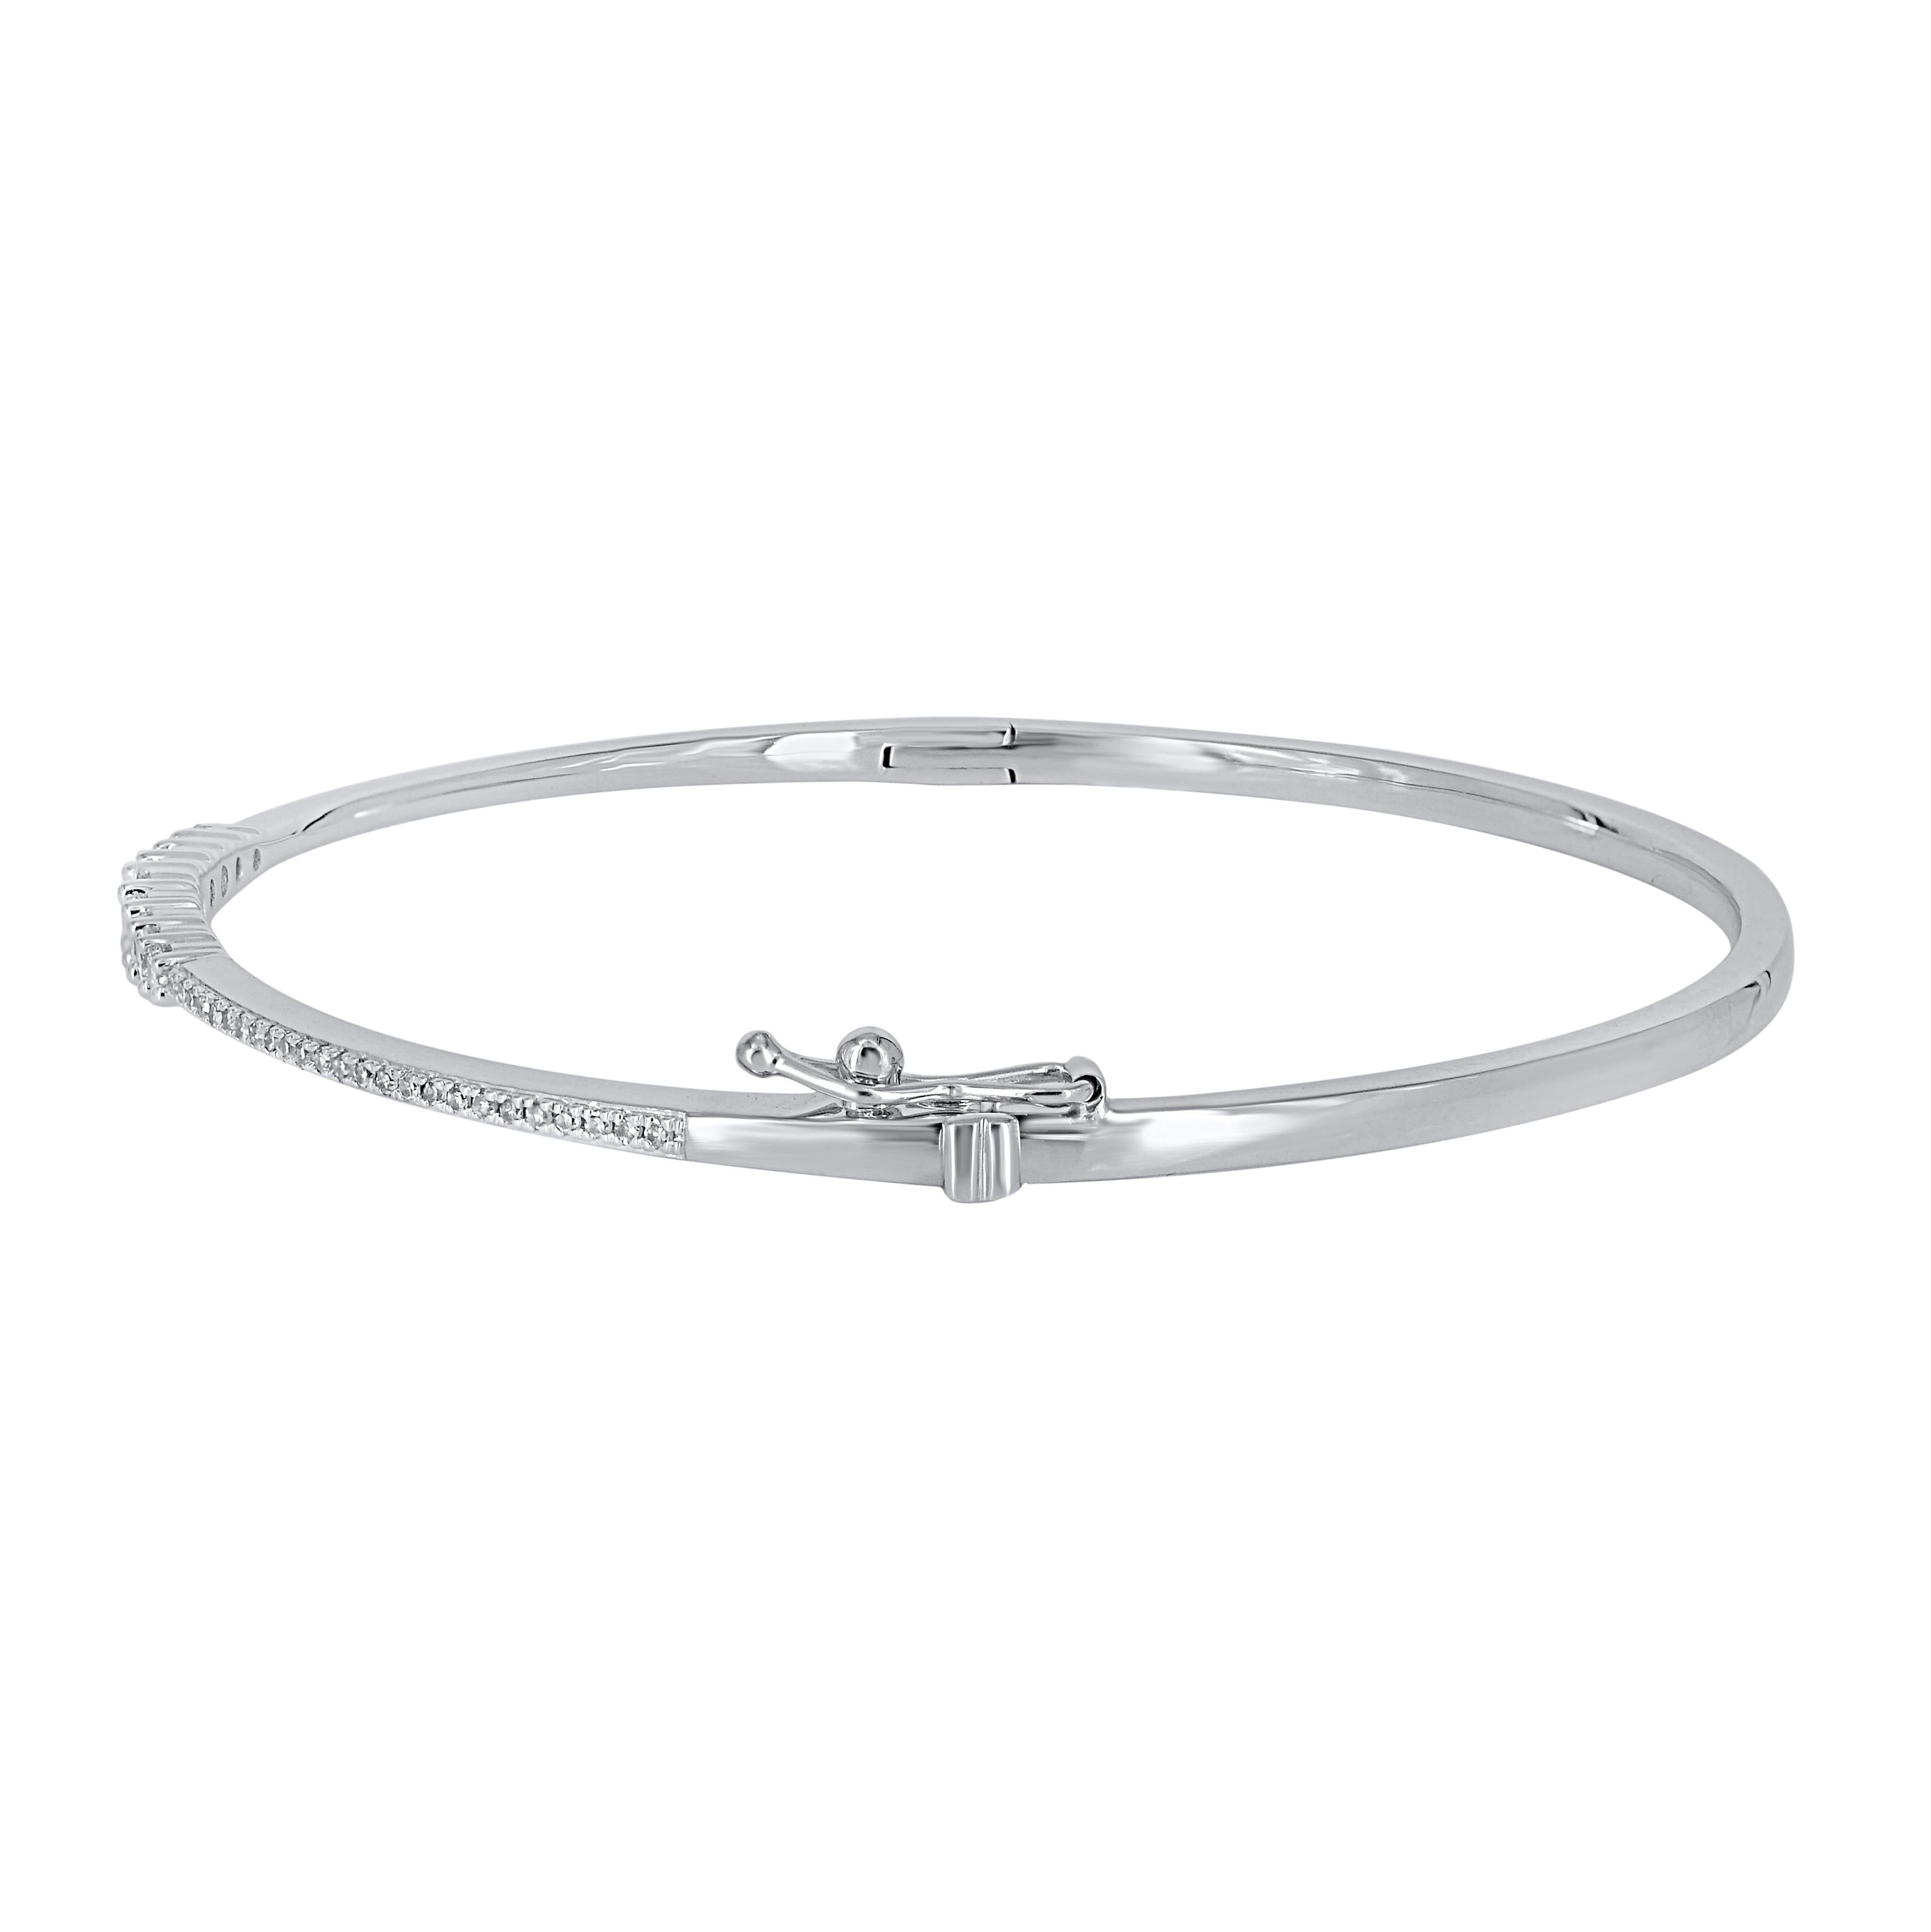 Contemporary TJD 0.50 Carat Natural Round Diamond Bangle Bracelet in 14KT White Gold For Sale